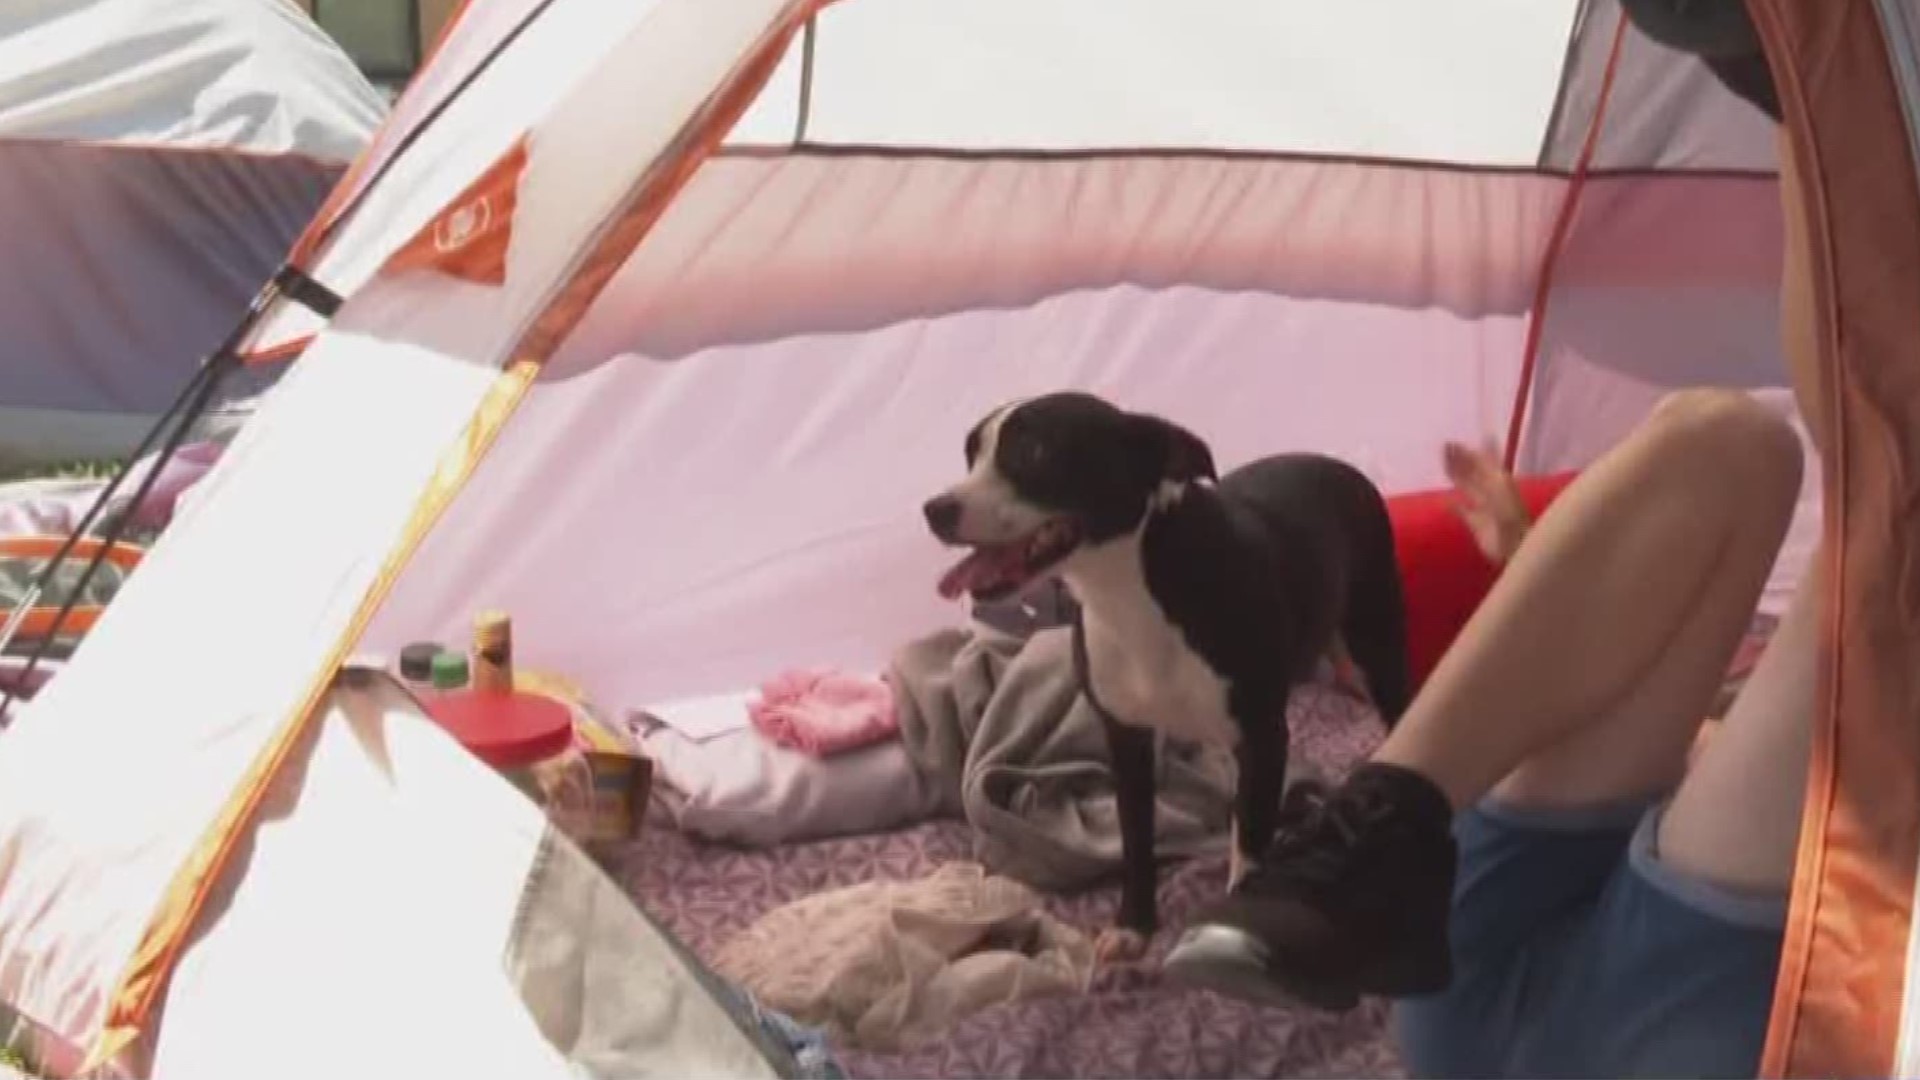 The director of the Pound Pup and Friends rescue is helping animals in Killeen's tent city with donations and medical services. She even took in two dogs from a homeless family moving out of state and promised to care for them herself until they find their forever home.